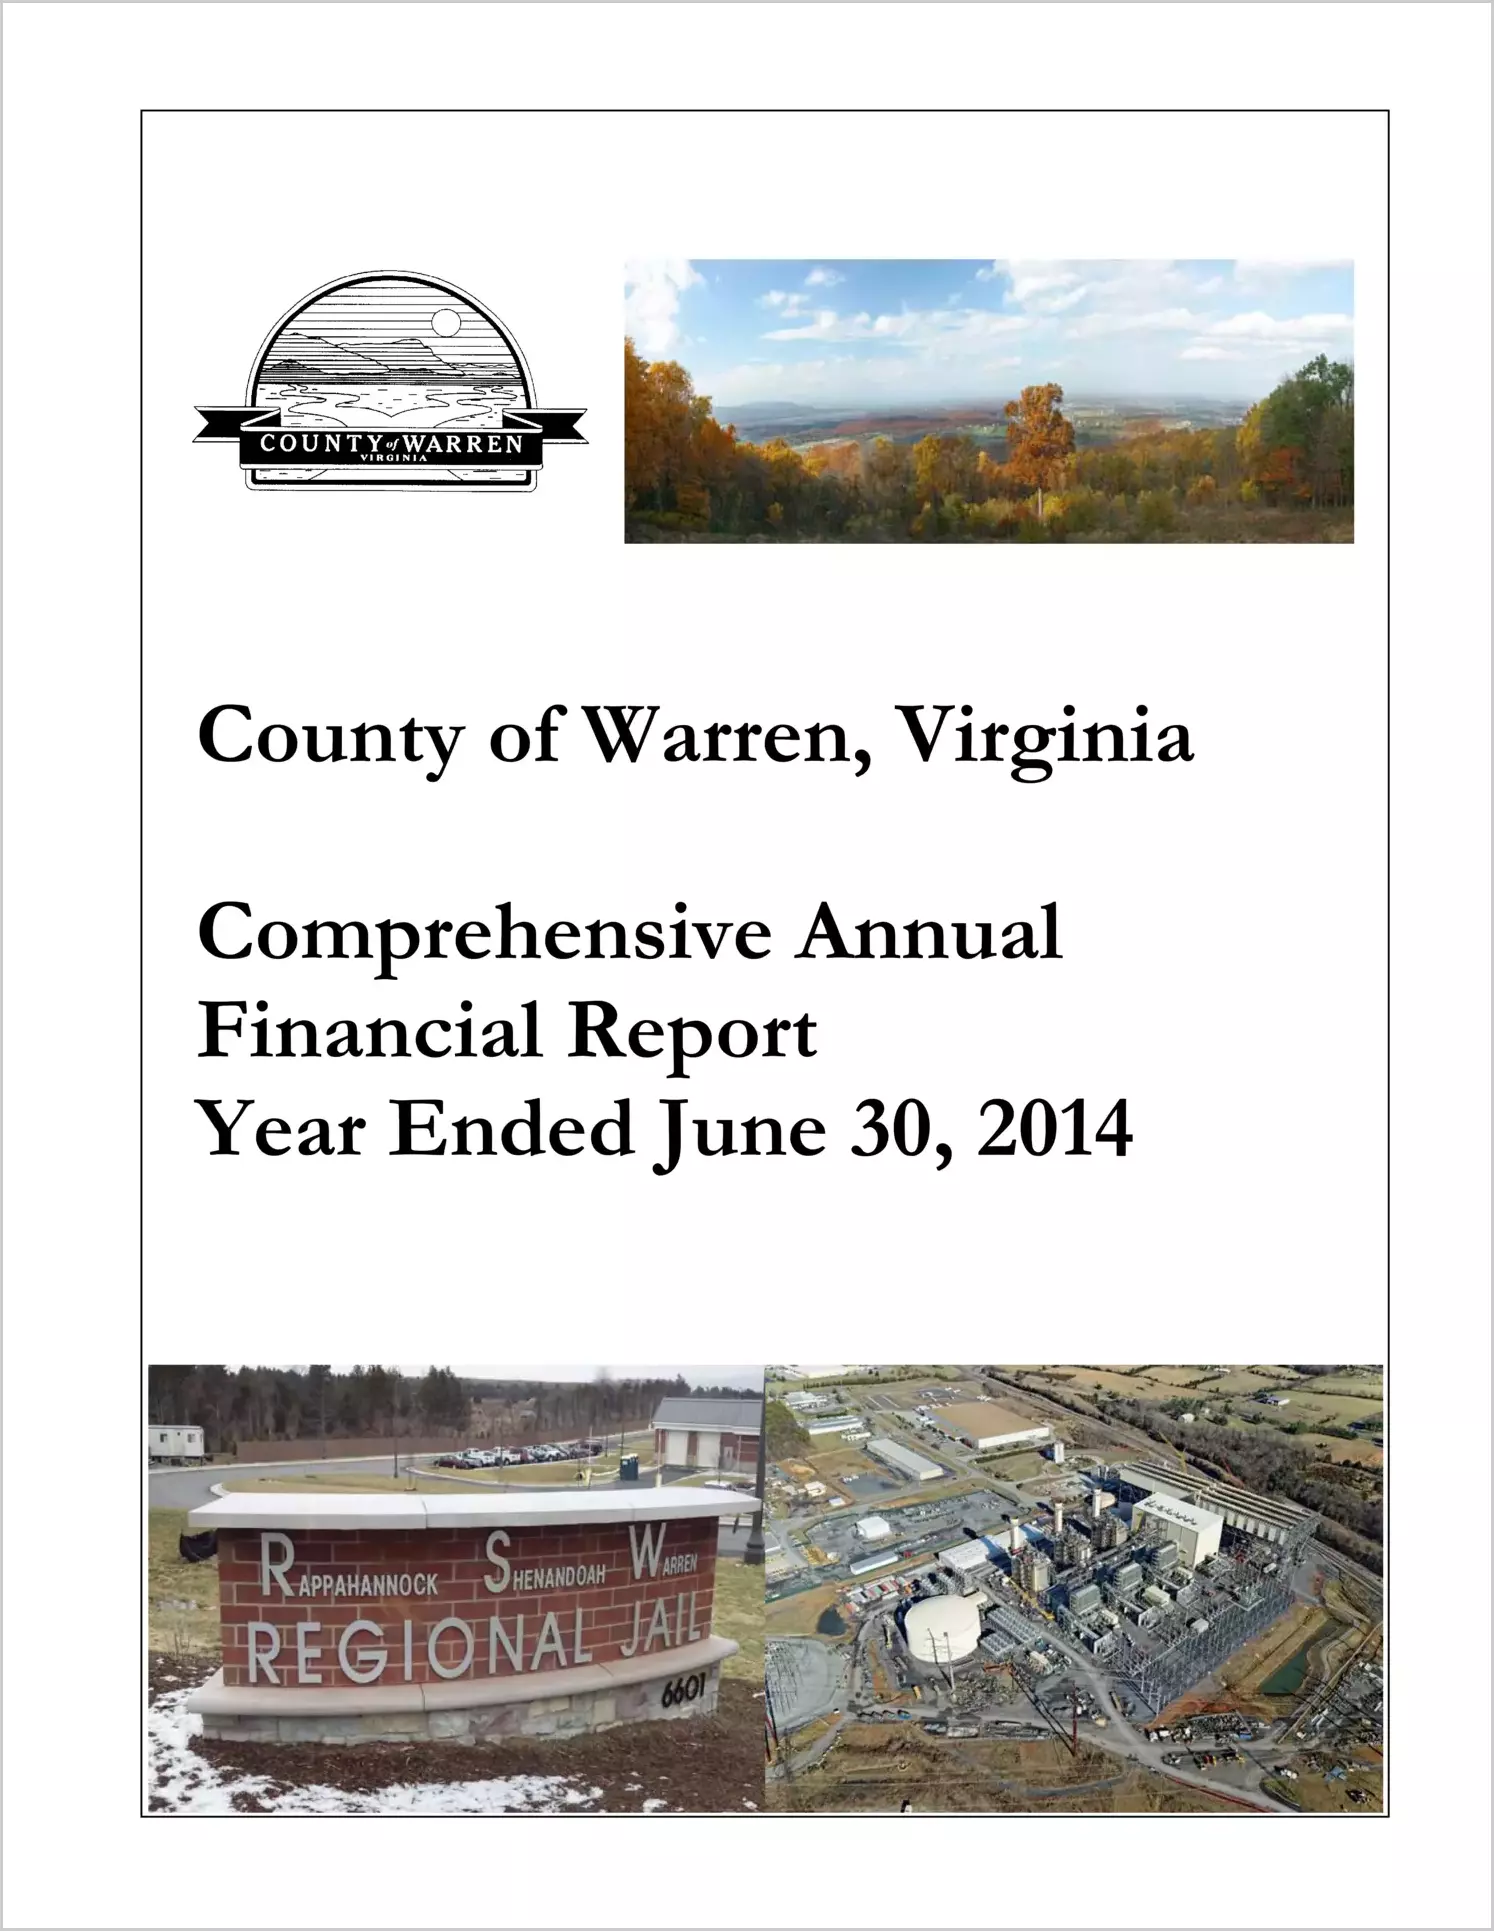 2014 Annual Financial Report for County of Warren